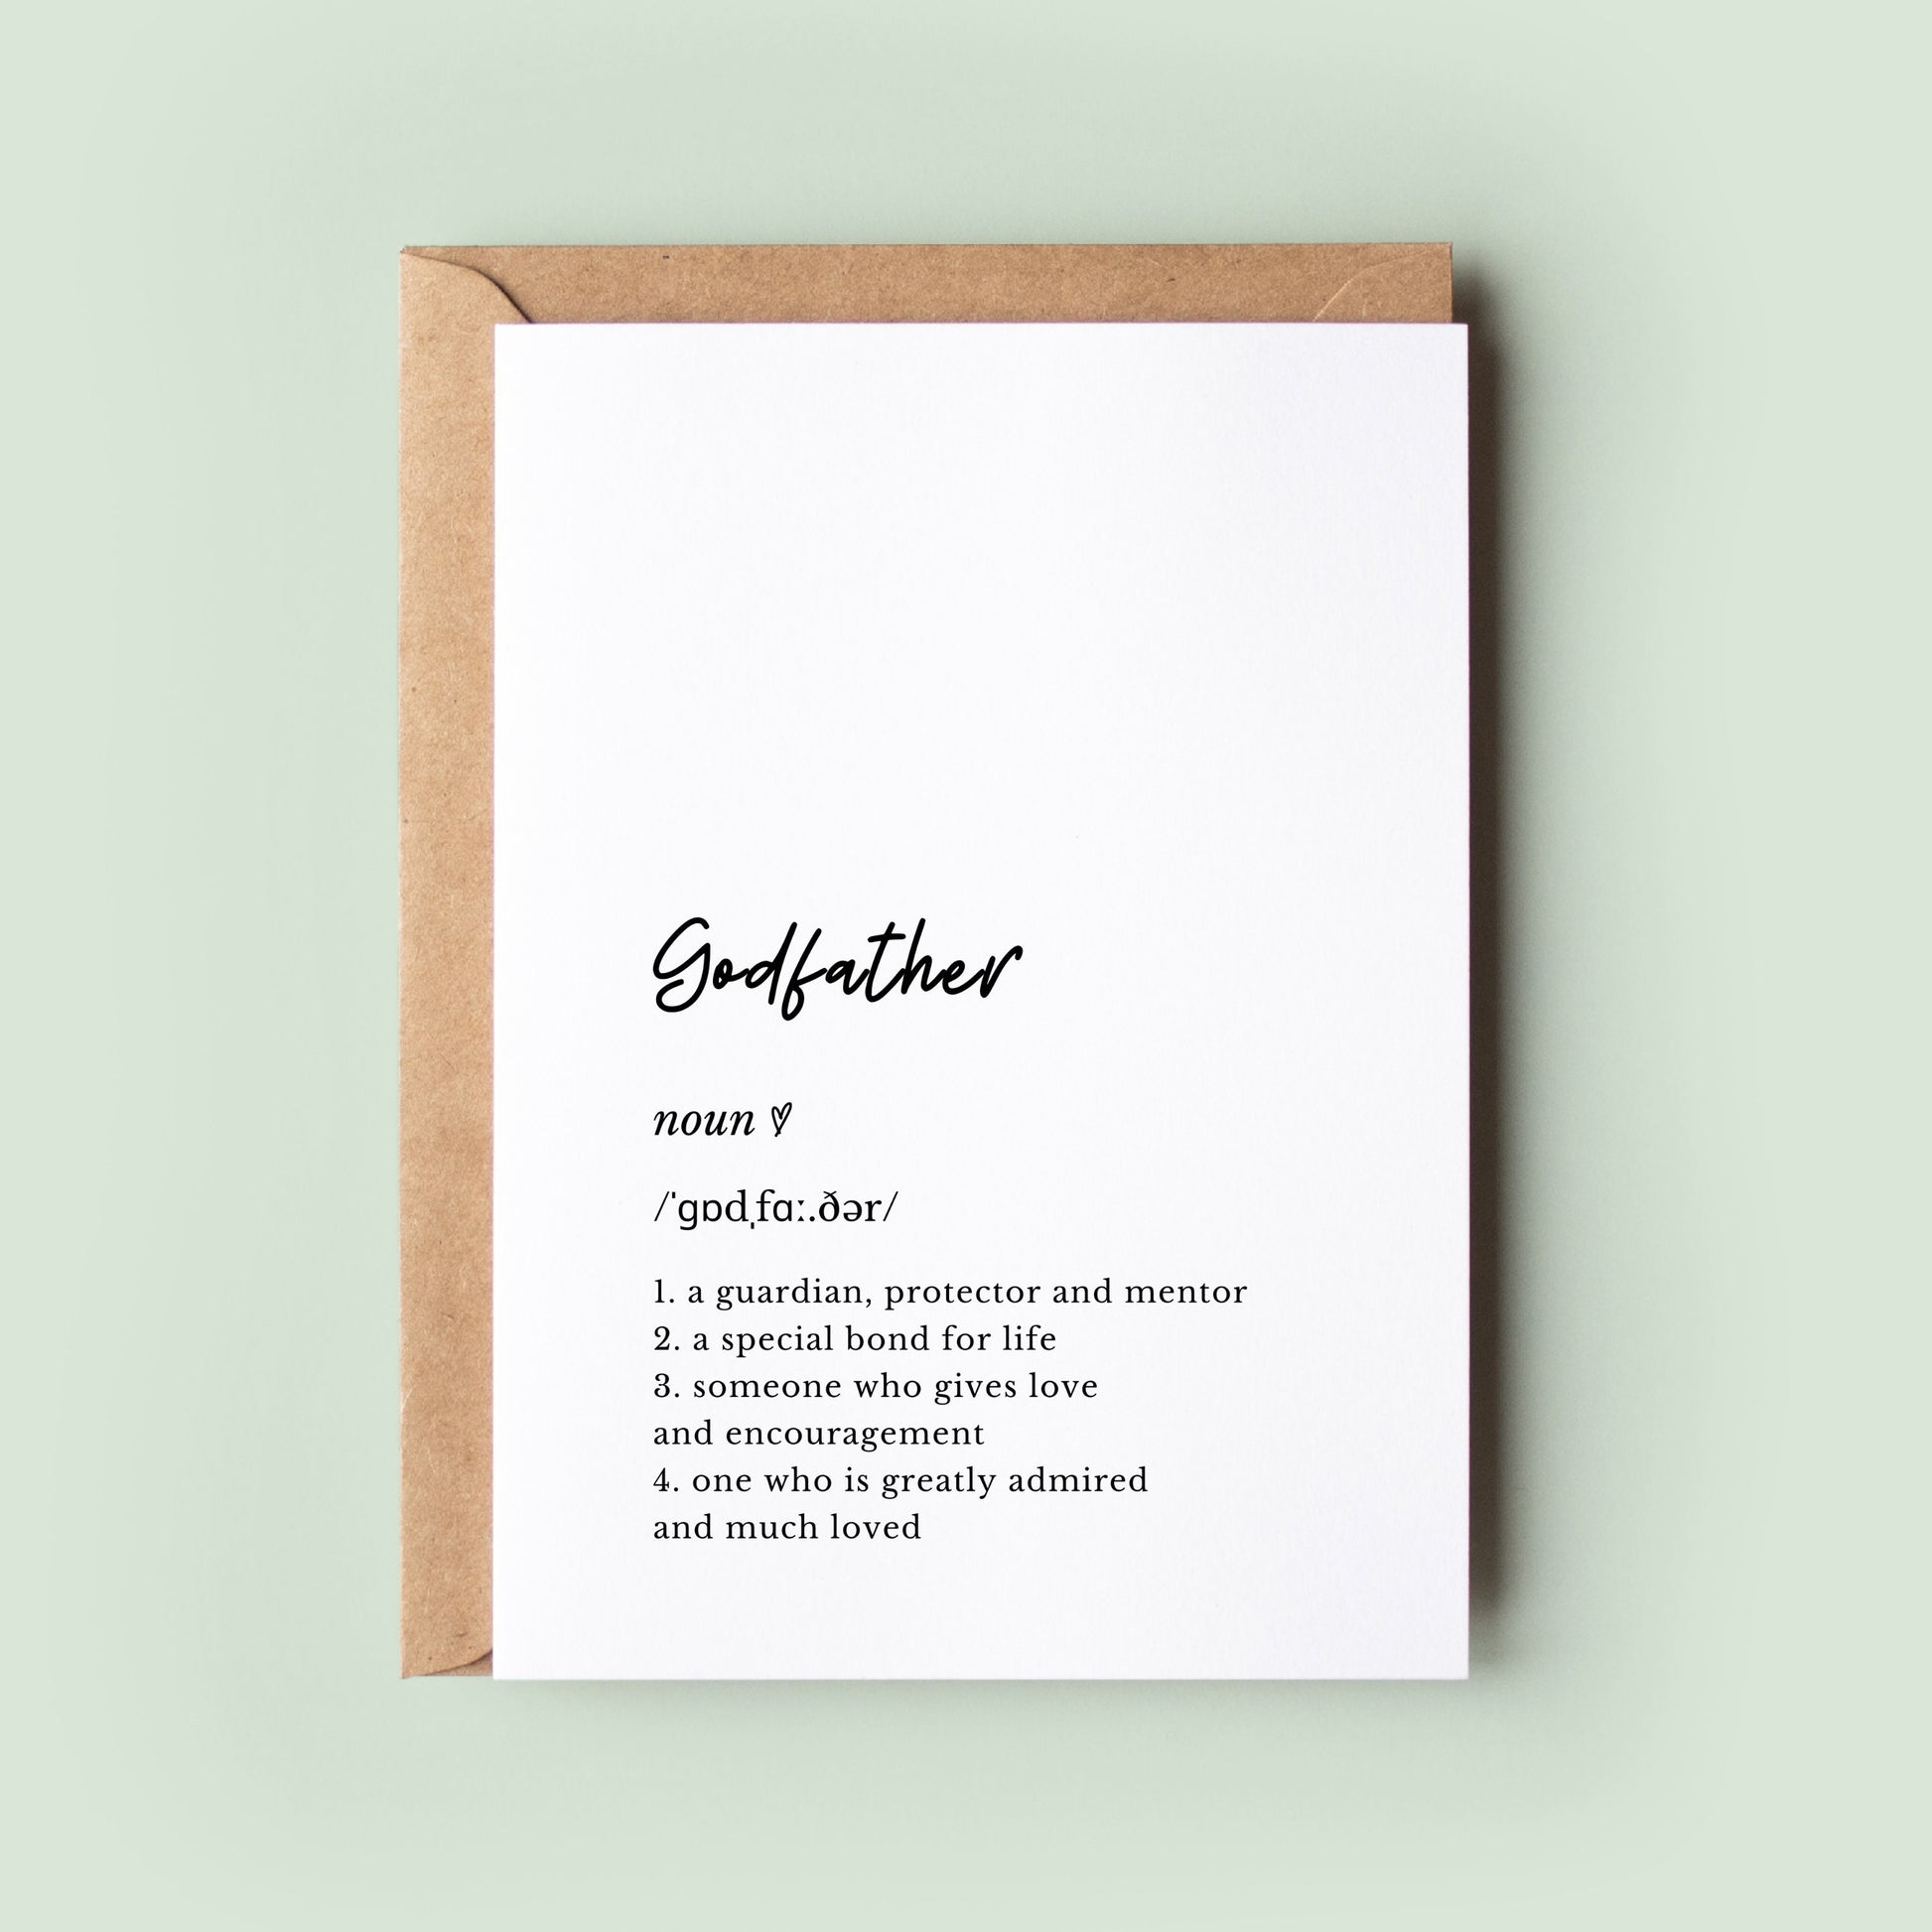 Godparent Definition Card, Will You Be My Godparent Card, GodparentProposal Card, Godparent Card, Christening Card, Godmother, Godfather